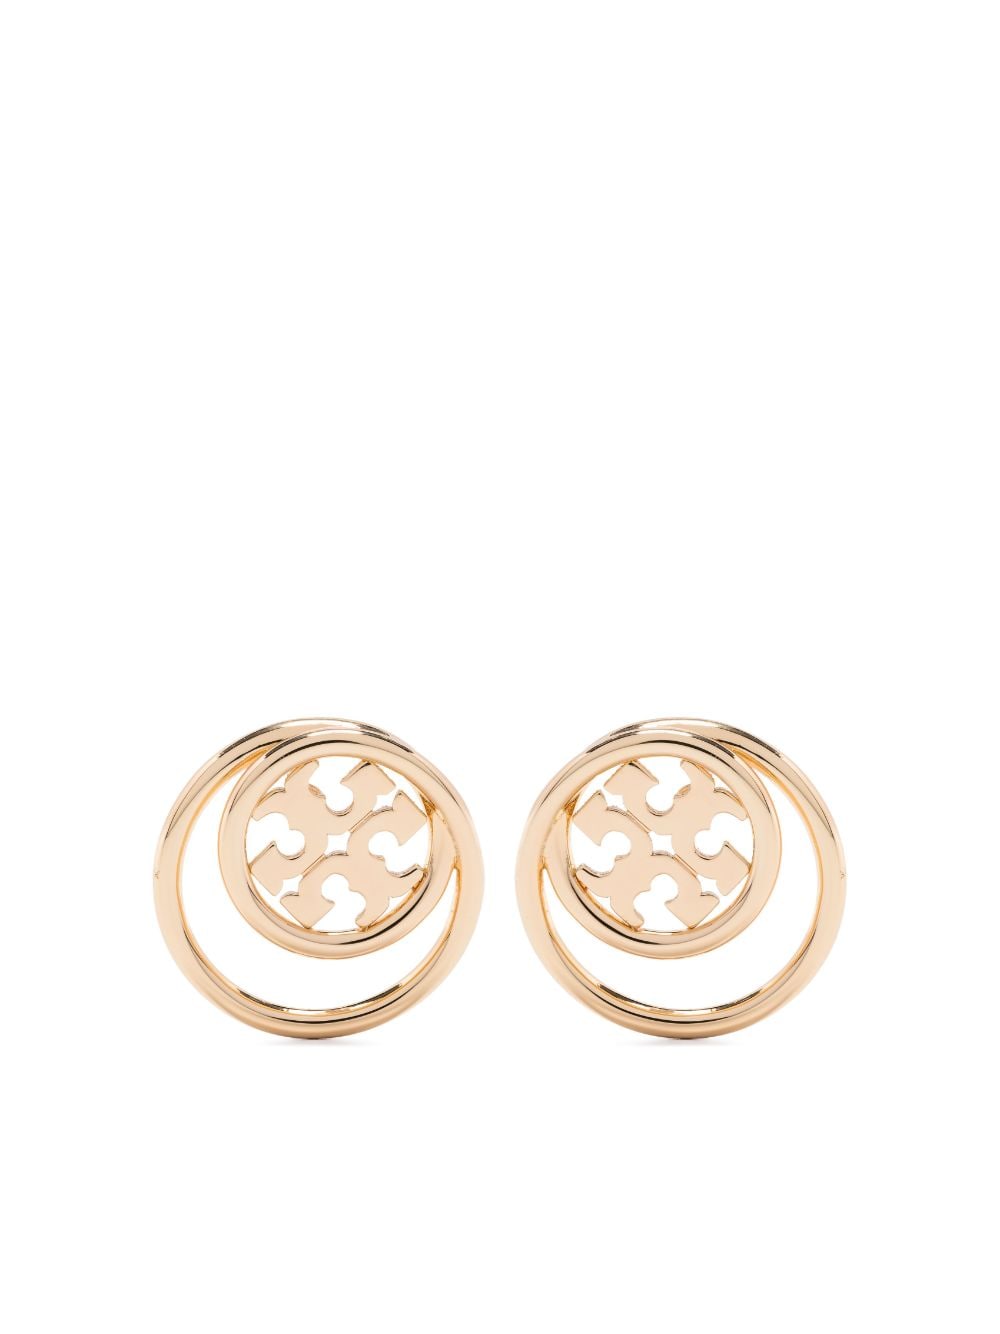 Tory Burch Double T cut-out stud earrings - Gold von Tory Burch